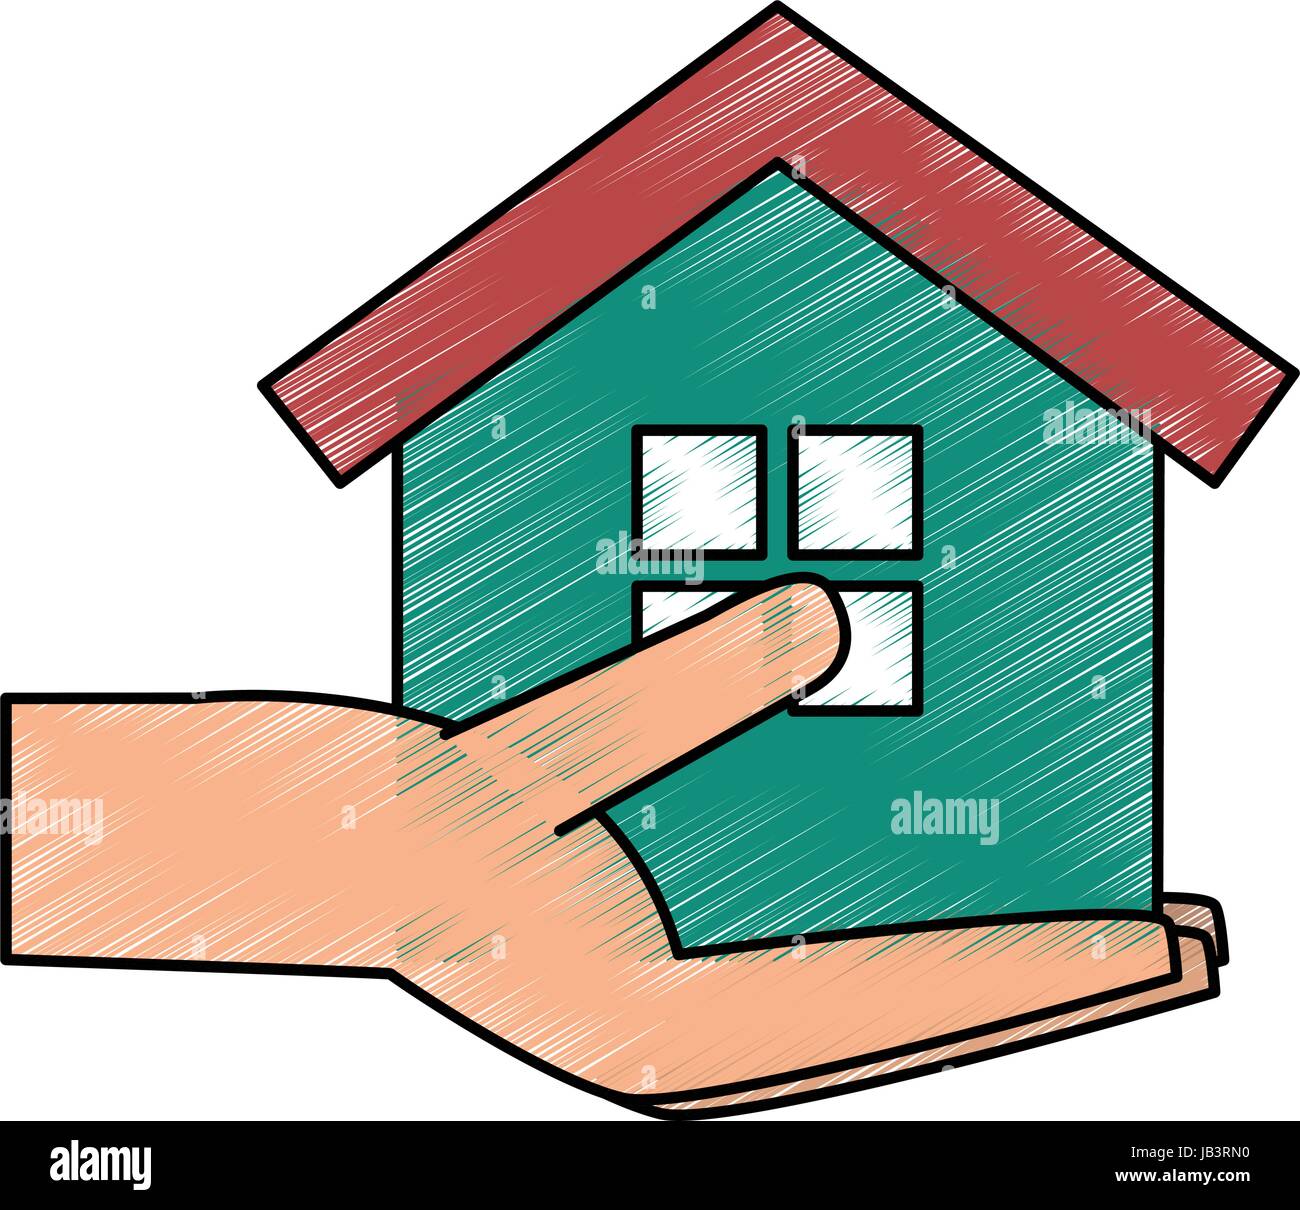 house icon image  Stock Vector